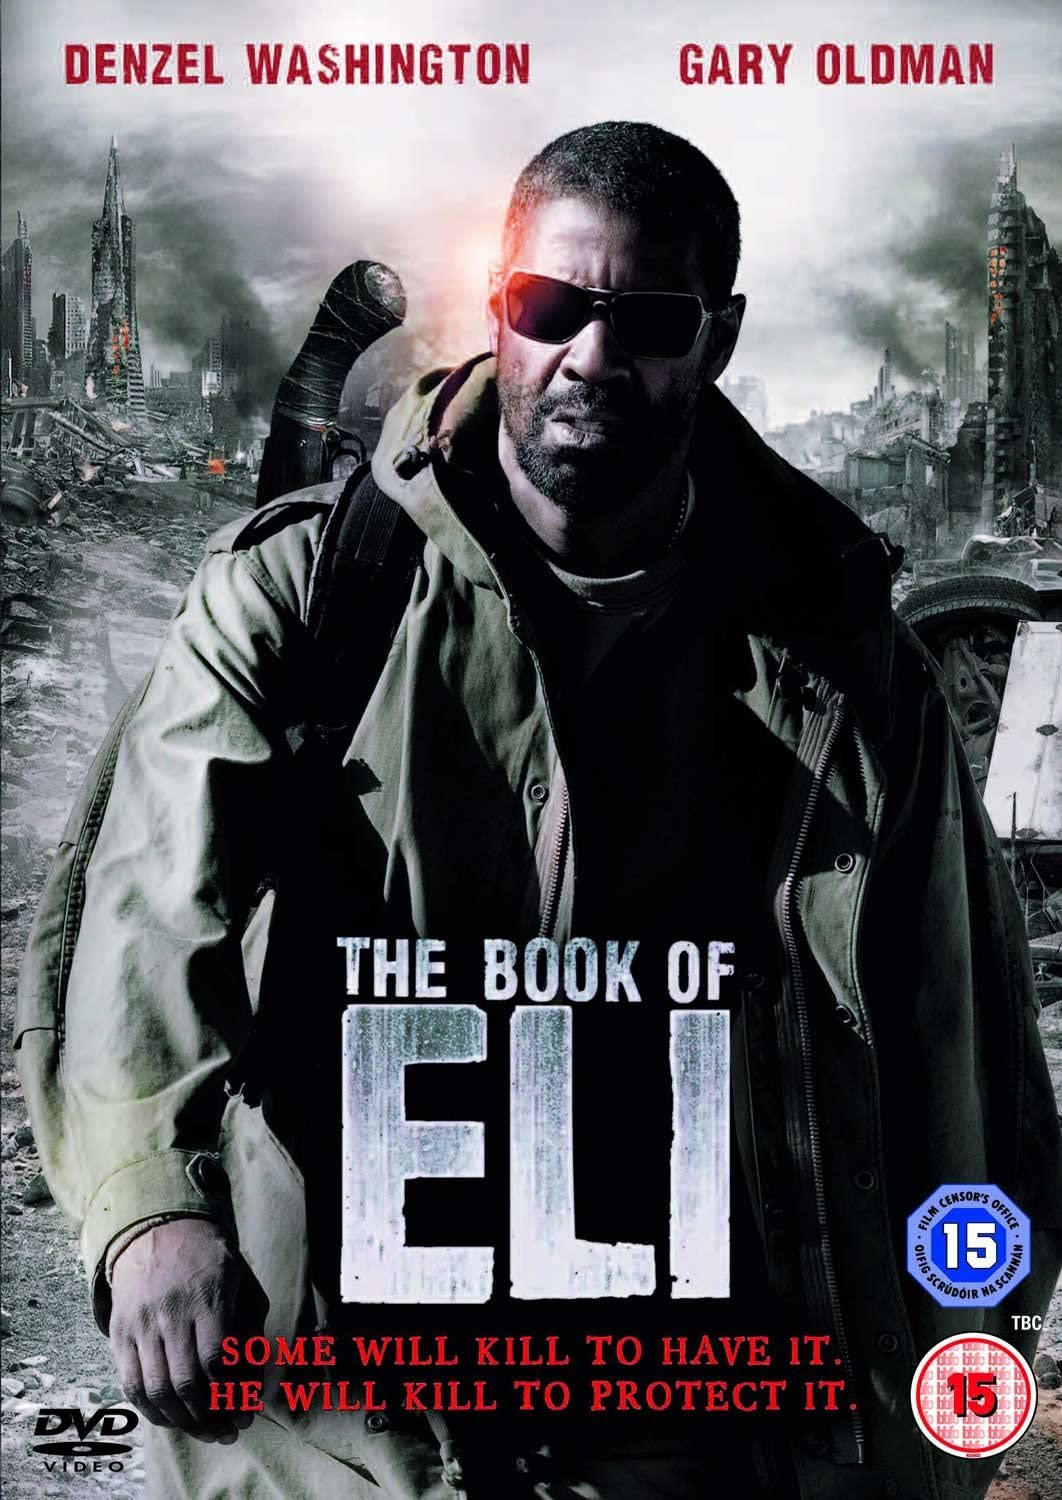 The Book of Eli [2017] - Action/Adventure [DVD]